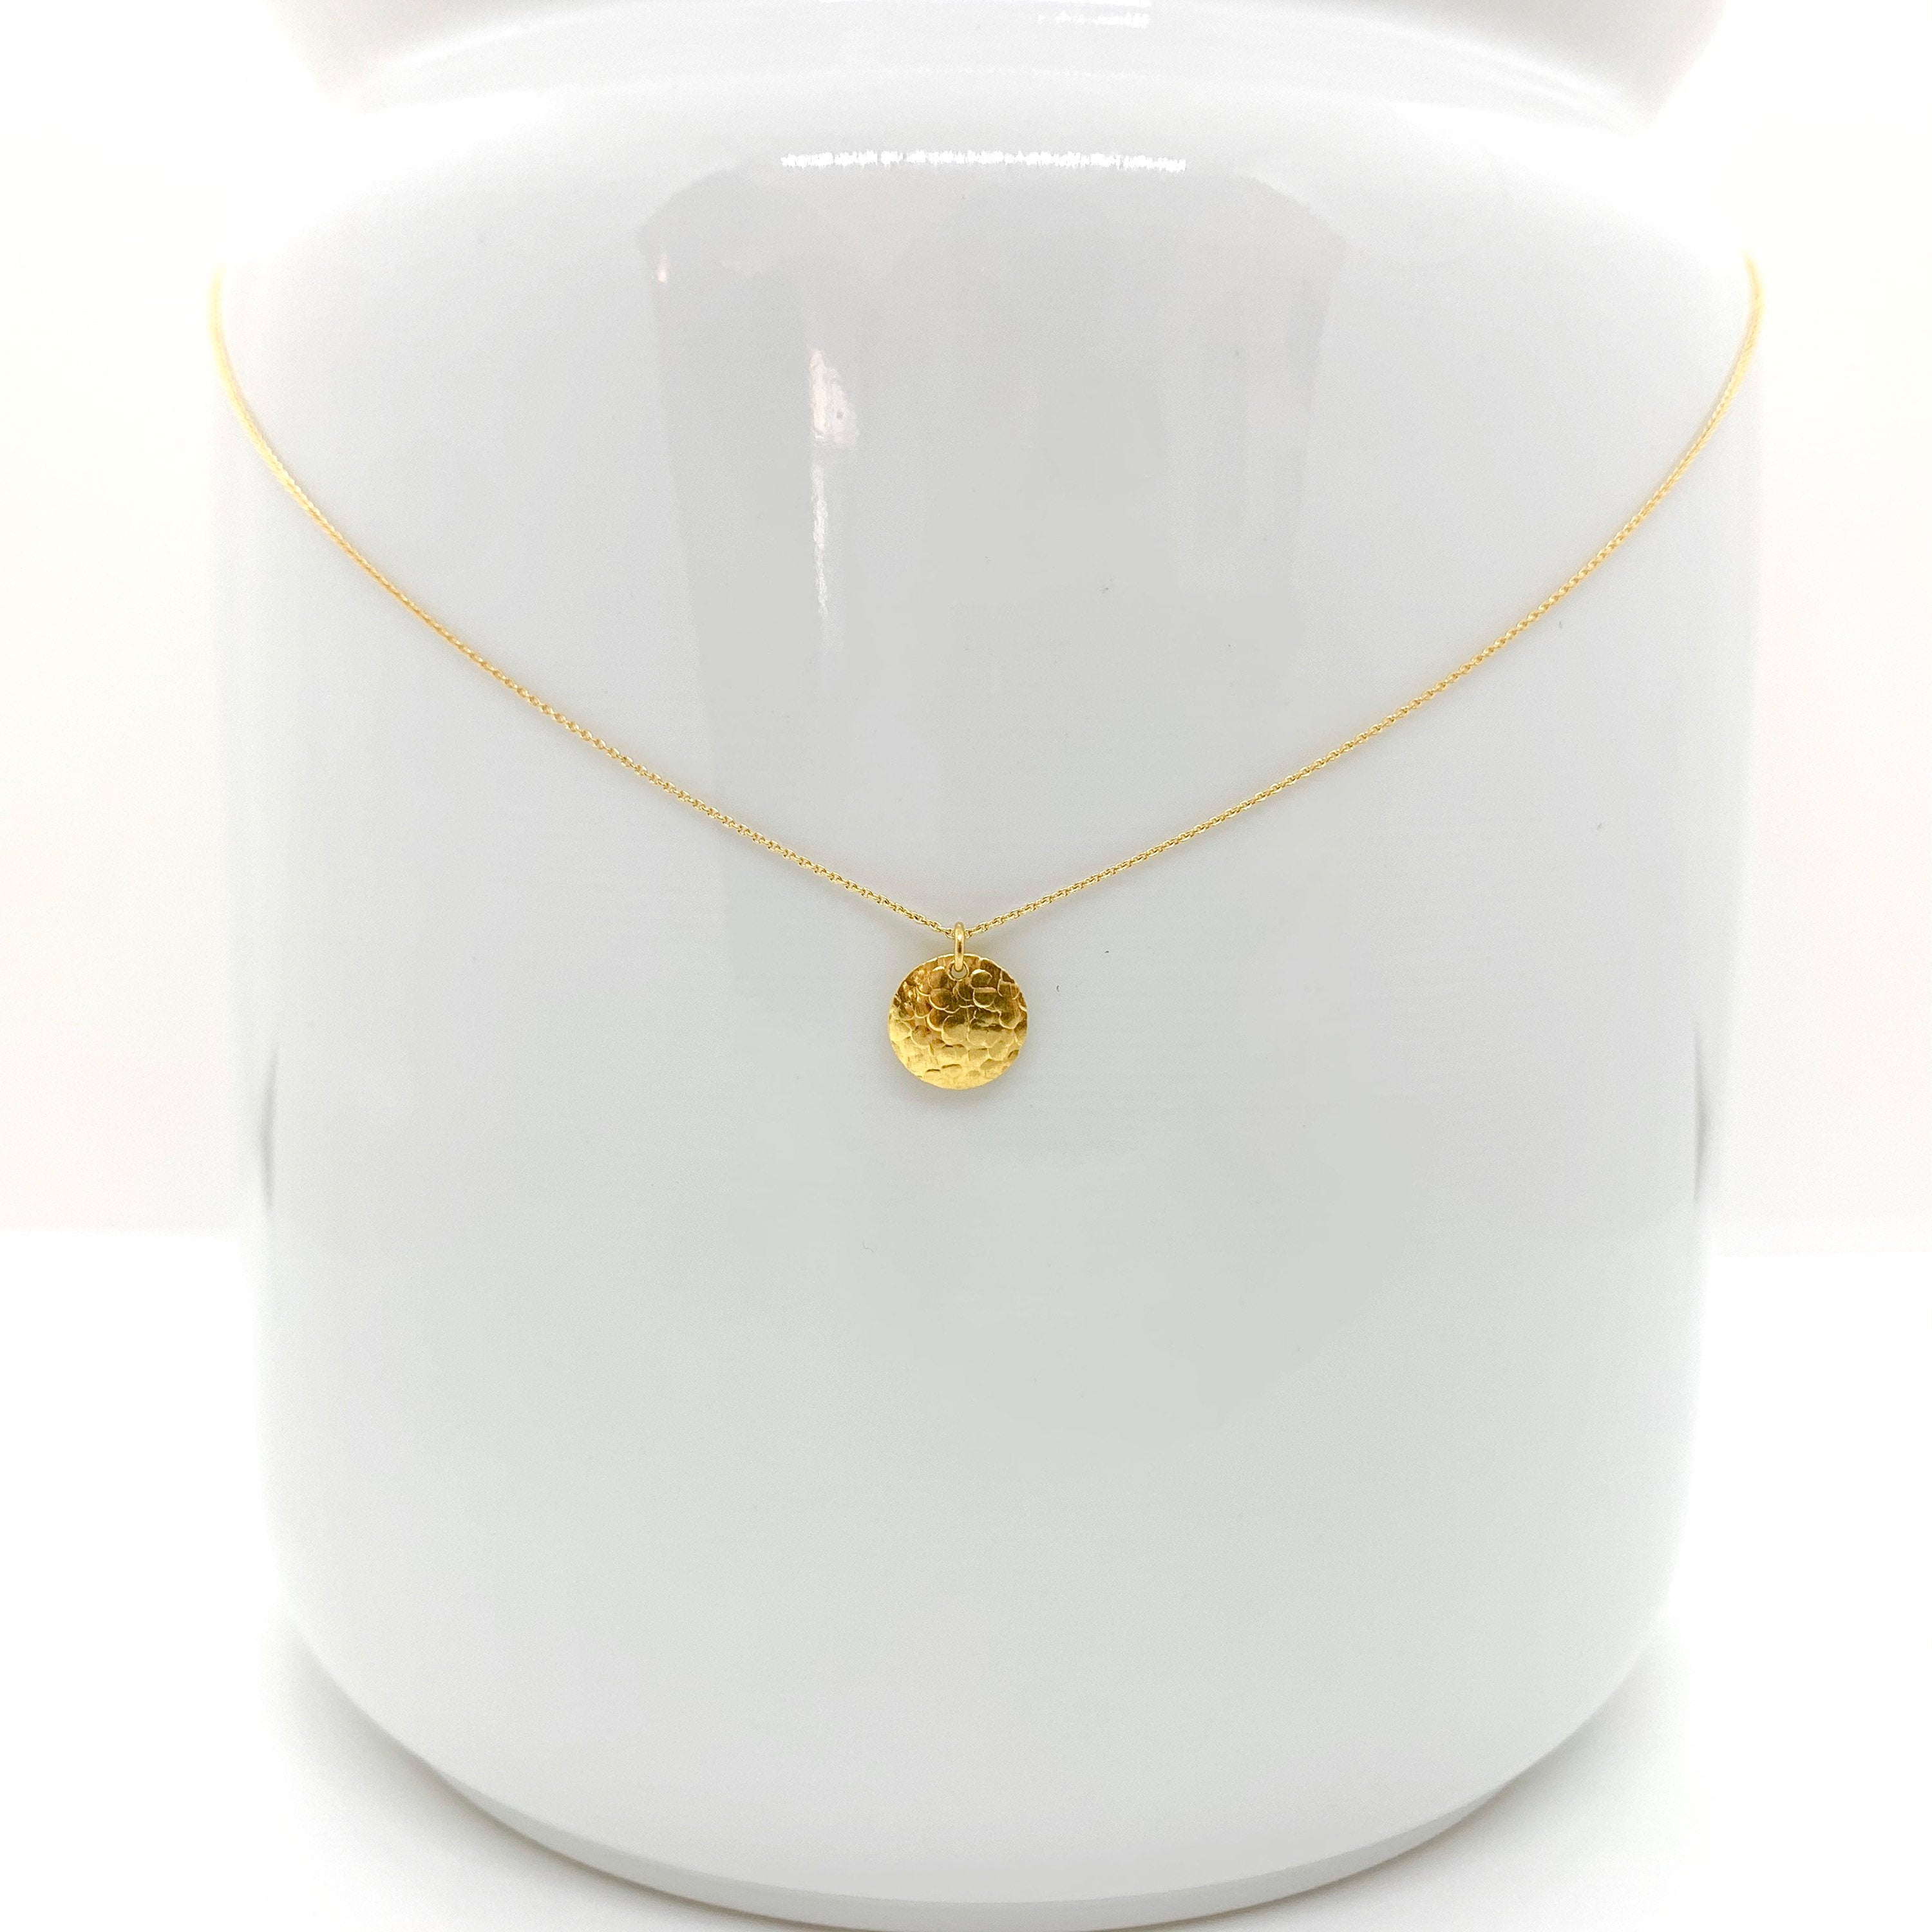 18K Gold Long Chain Pendant Necklace - Disk Charm Pendant - 14 K Gold Jewelry - Chain With Pendant - Gf Birthday Gift